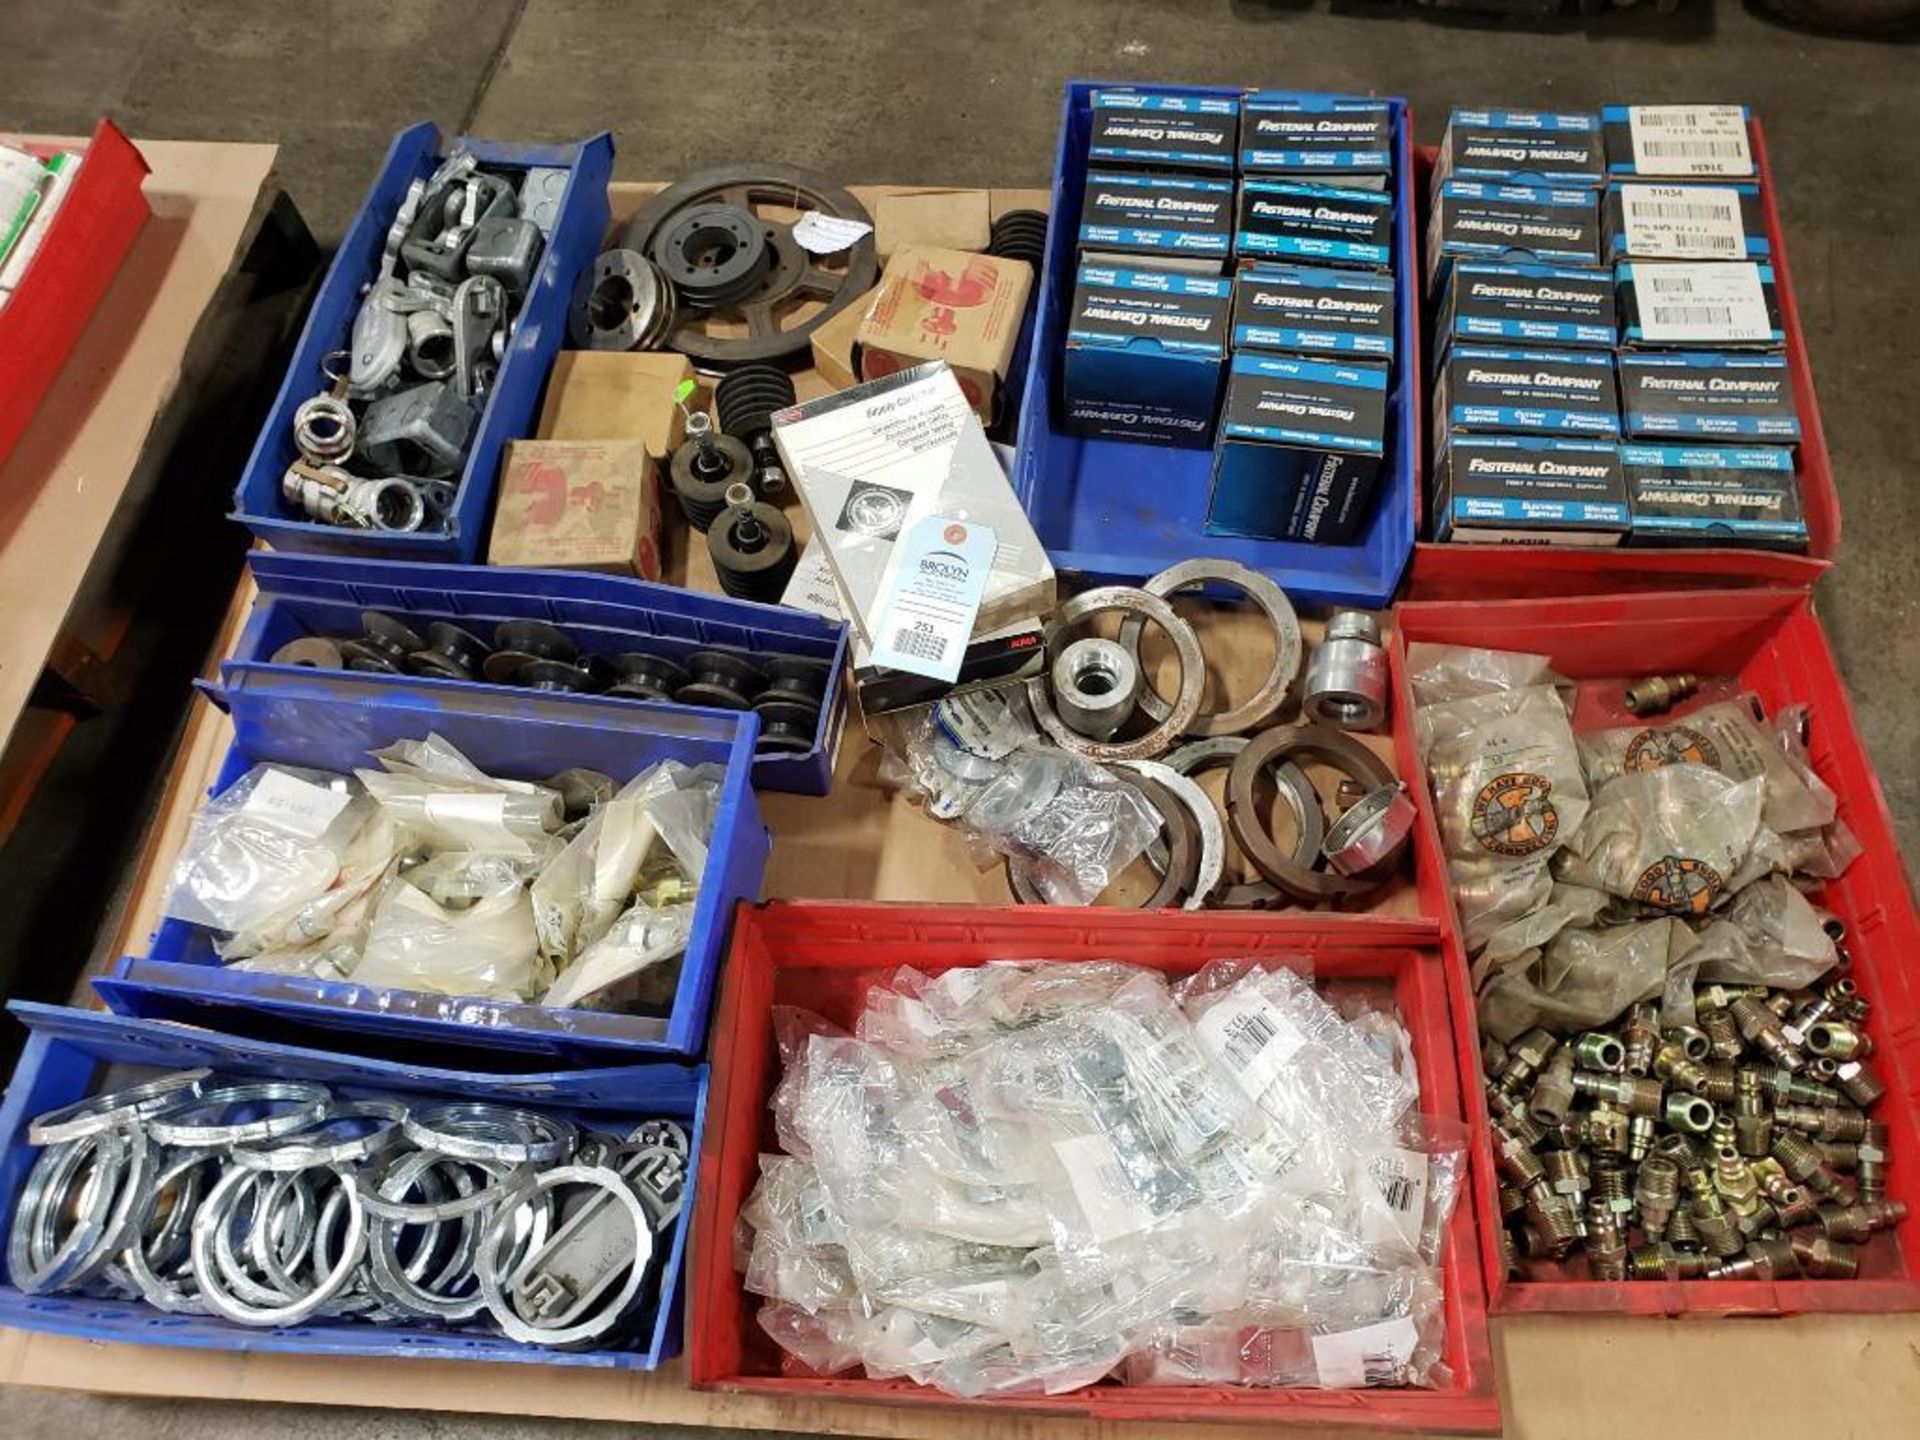 Pallet of assorted hardware. Rings, rollers, gears, fittings.